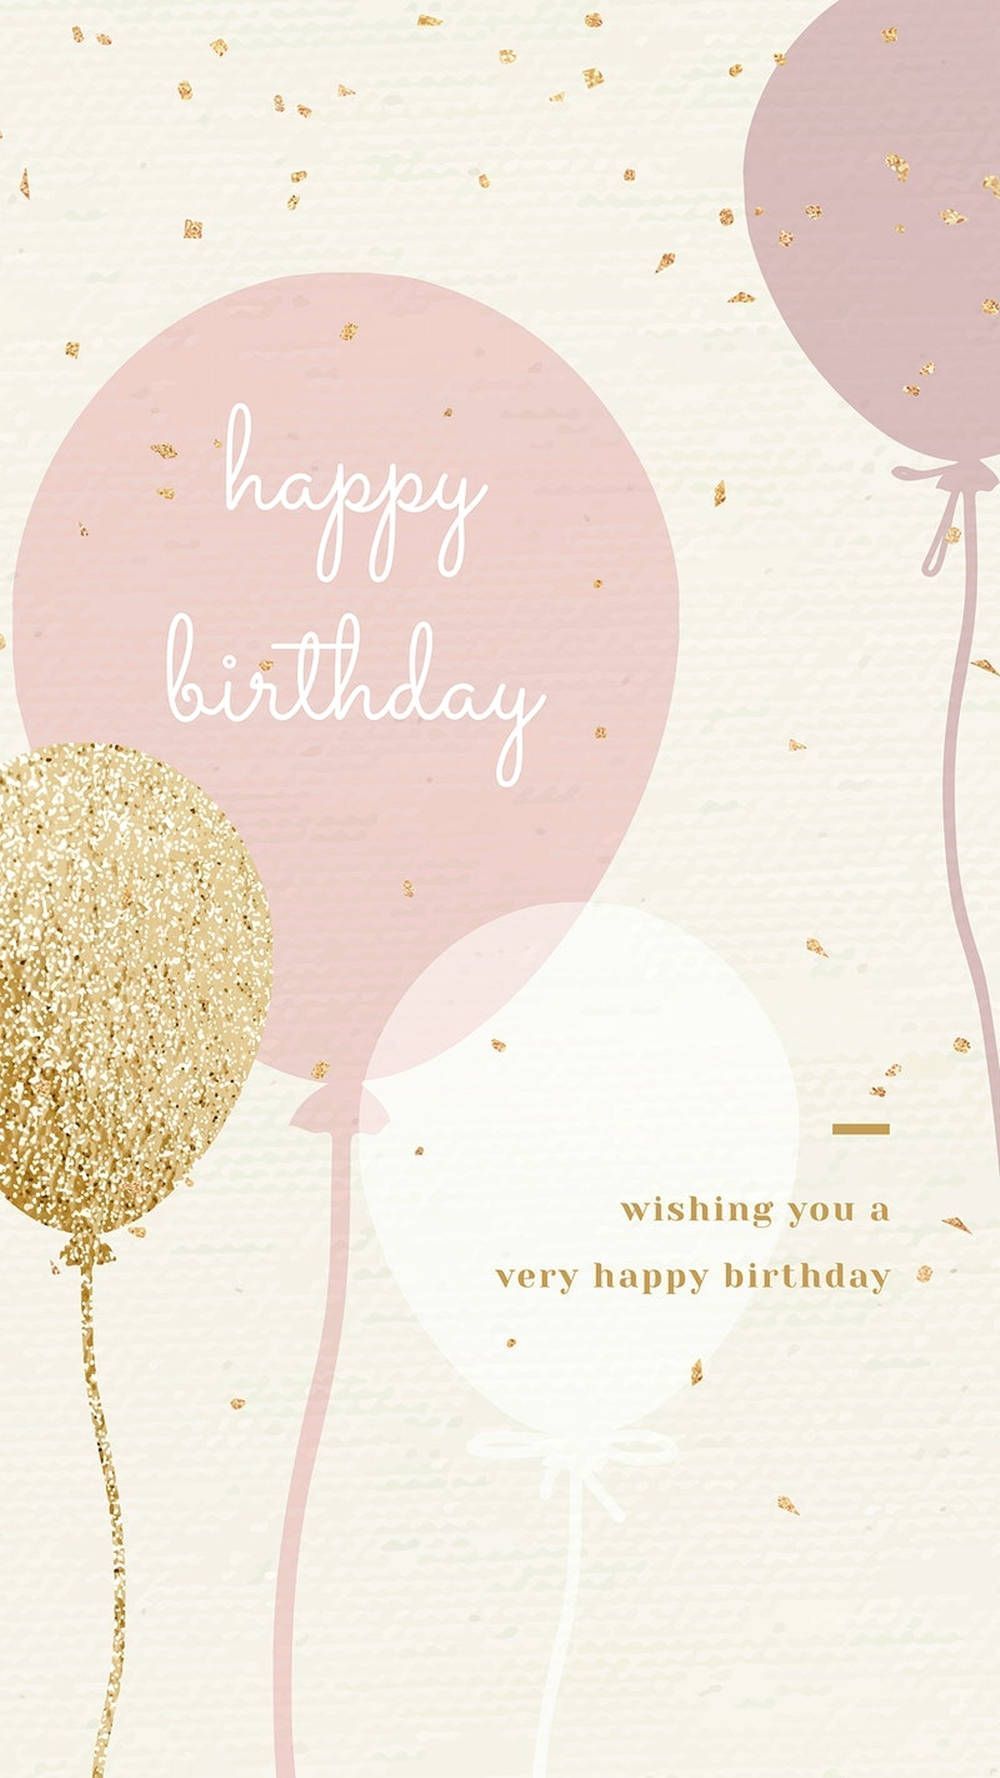 A birthday card with balloons and confetti - Birthday, balloons